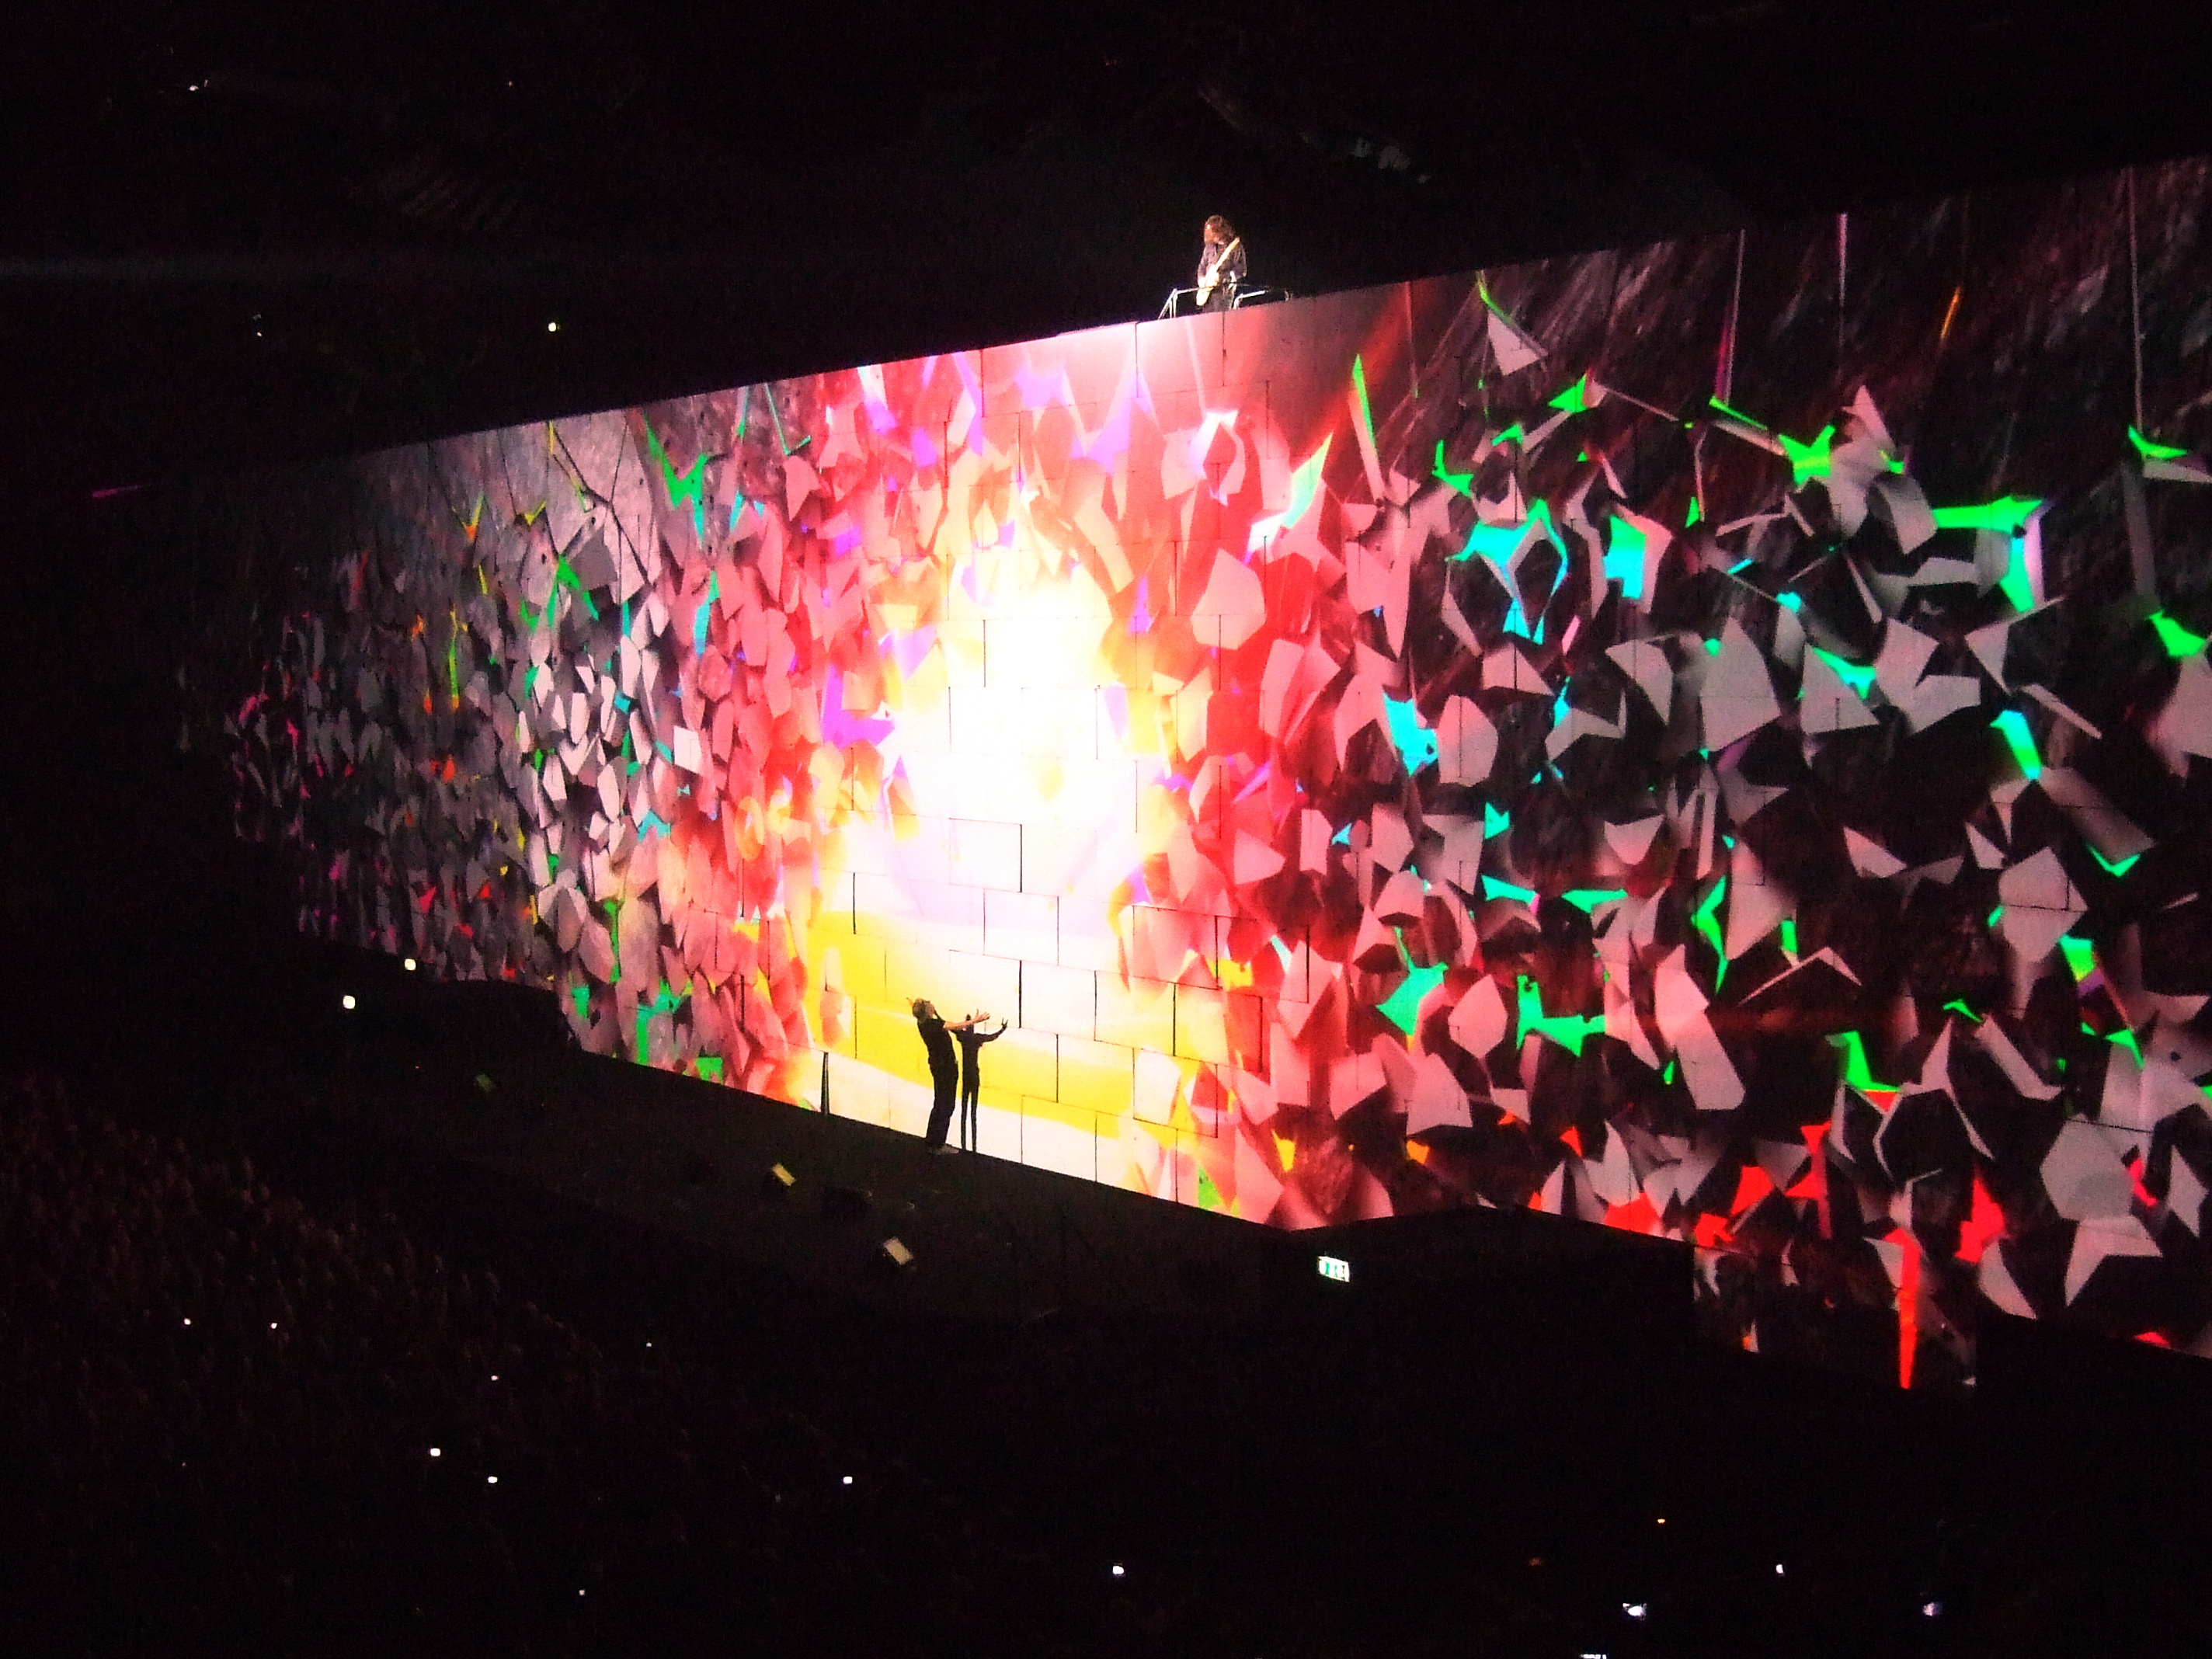 Dave performing 'Comfortably Numb' on top of the wall, whilst touring with Roger Waters on 'The Wall - Live' tour.